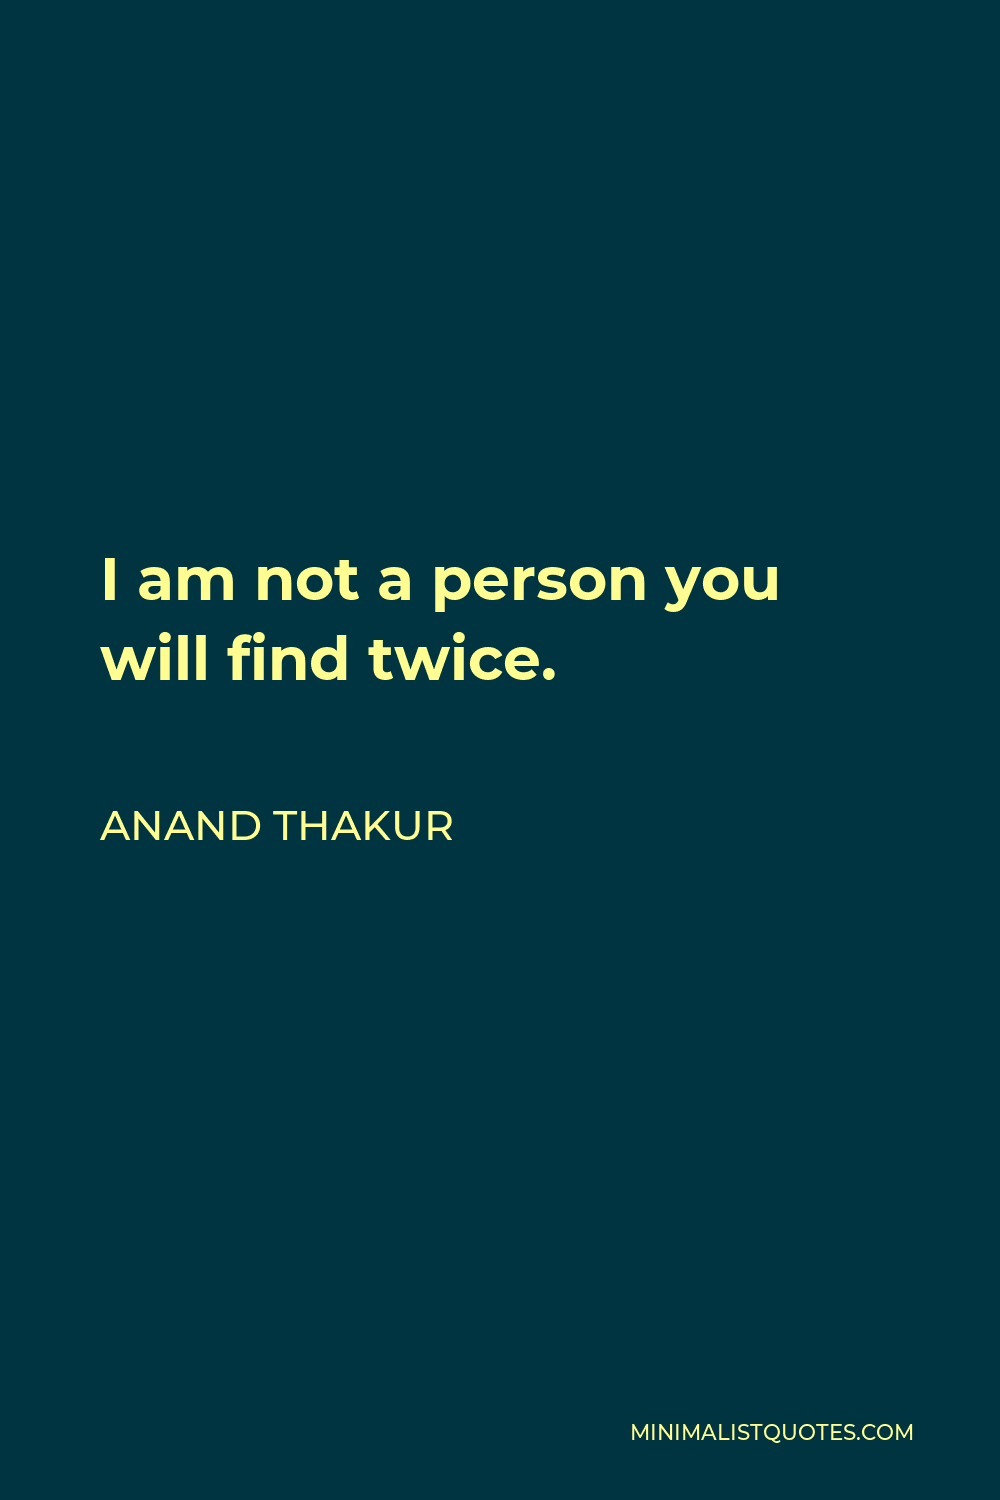 Anand Thakur Quote - I am not a person you will find twice.